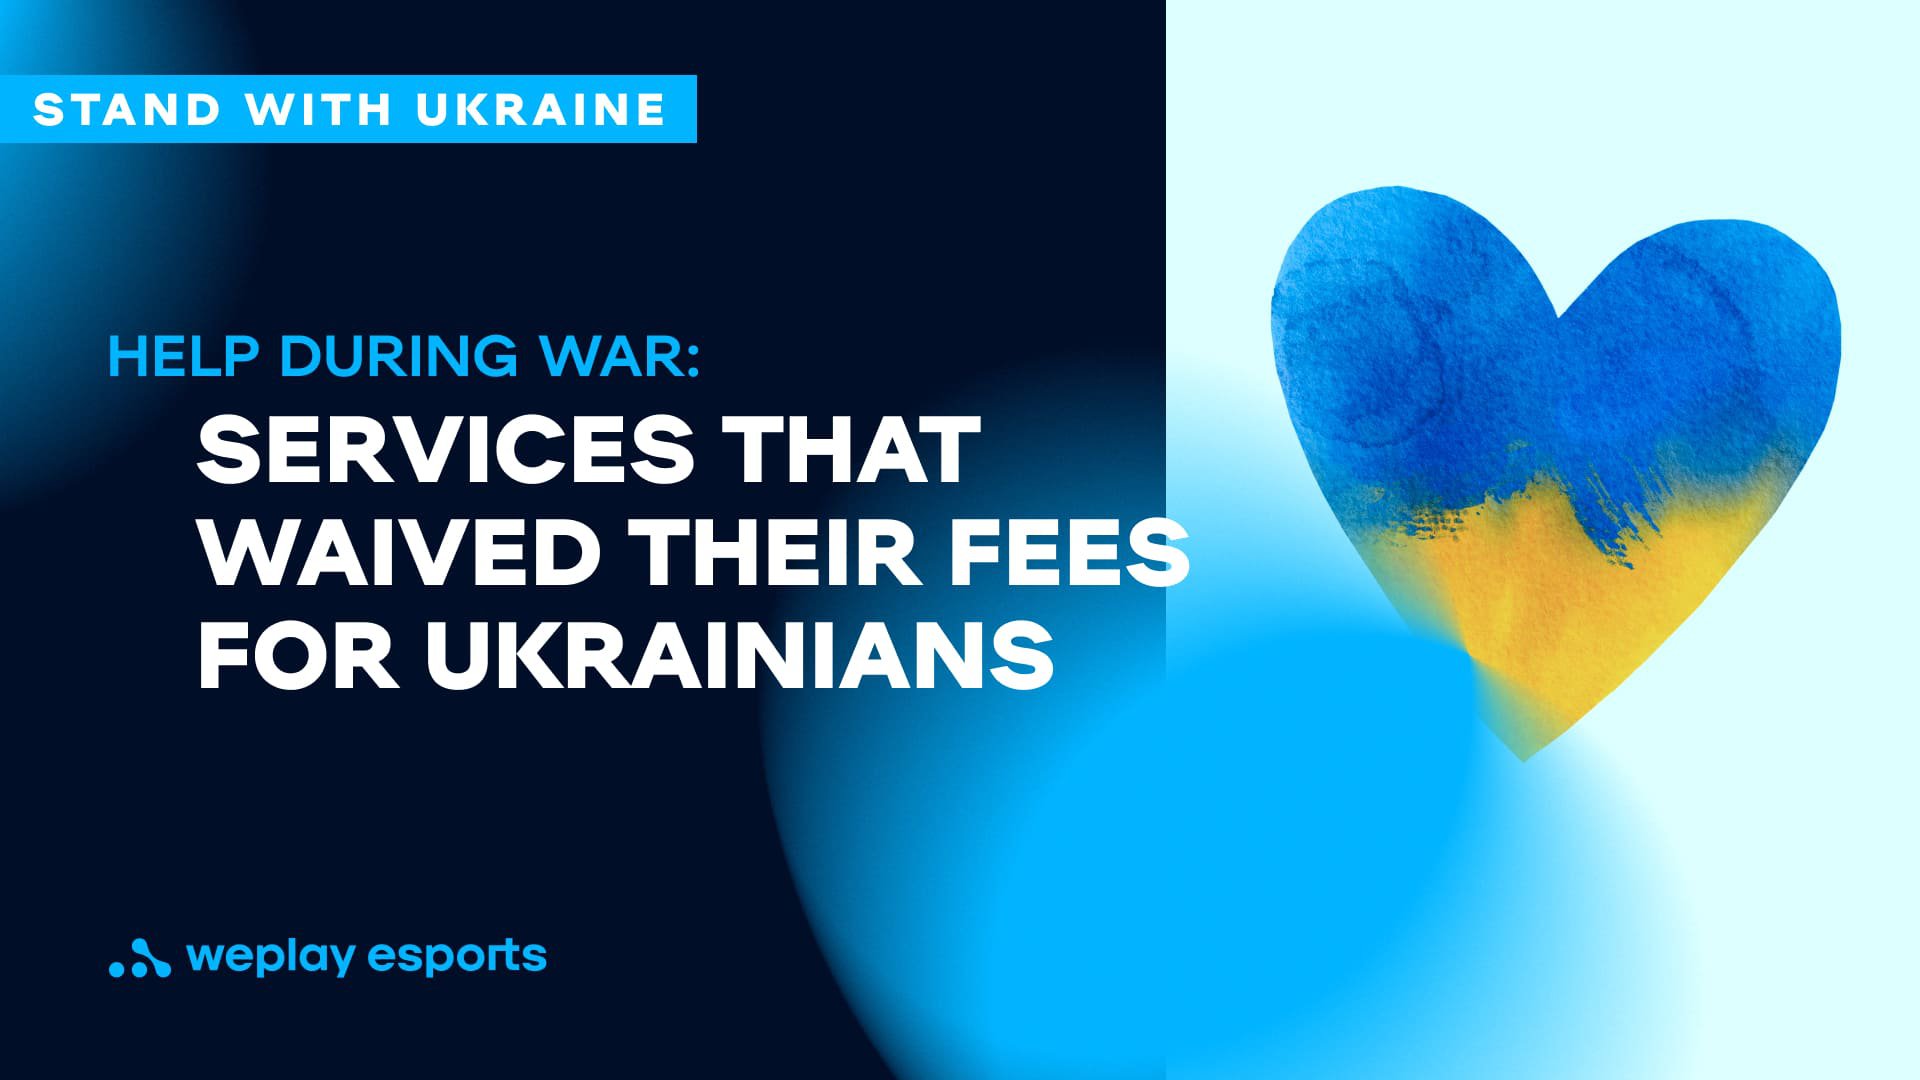 Help during war: services that waived their fees for Ukrainians